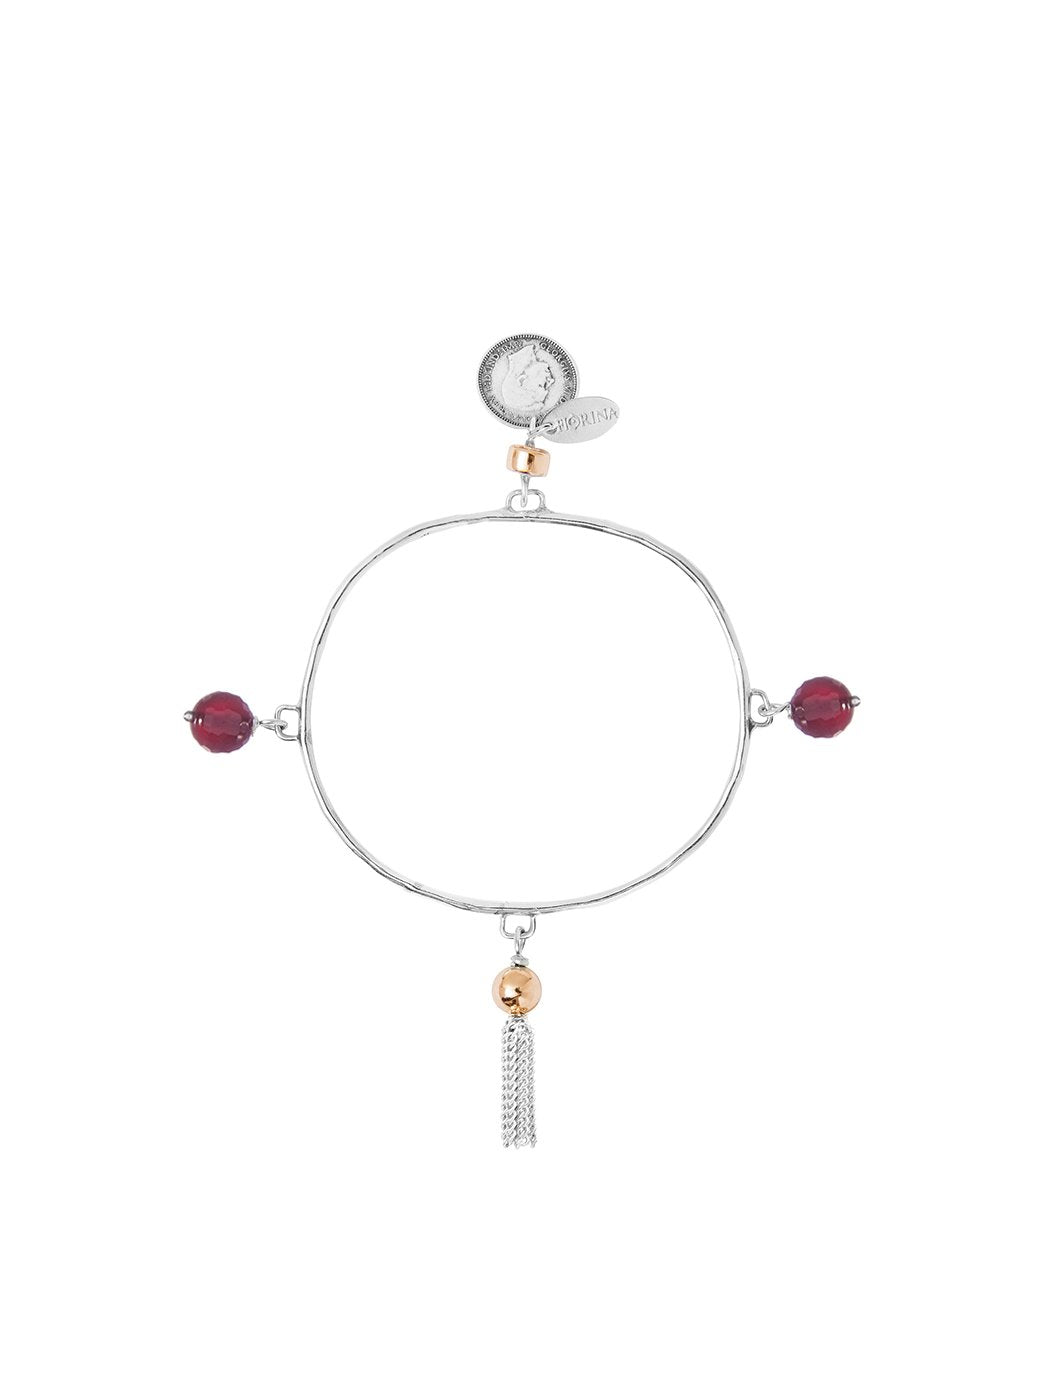 Four Seasons Bangle Red Coral